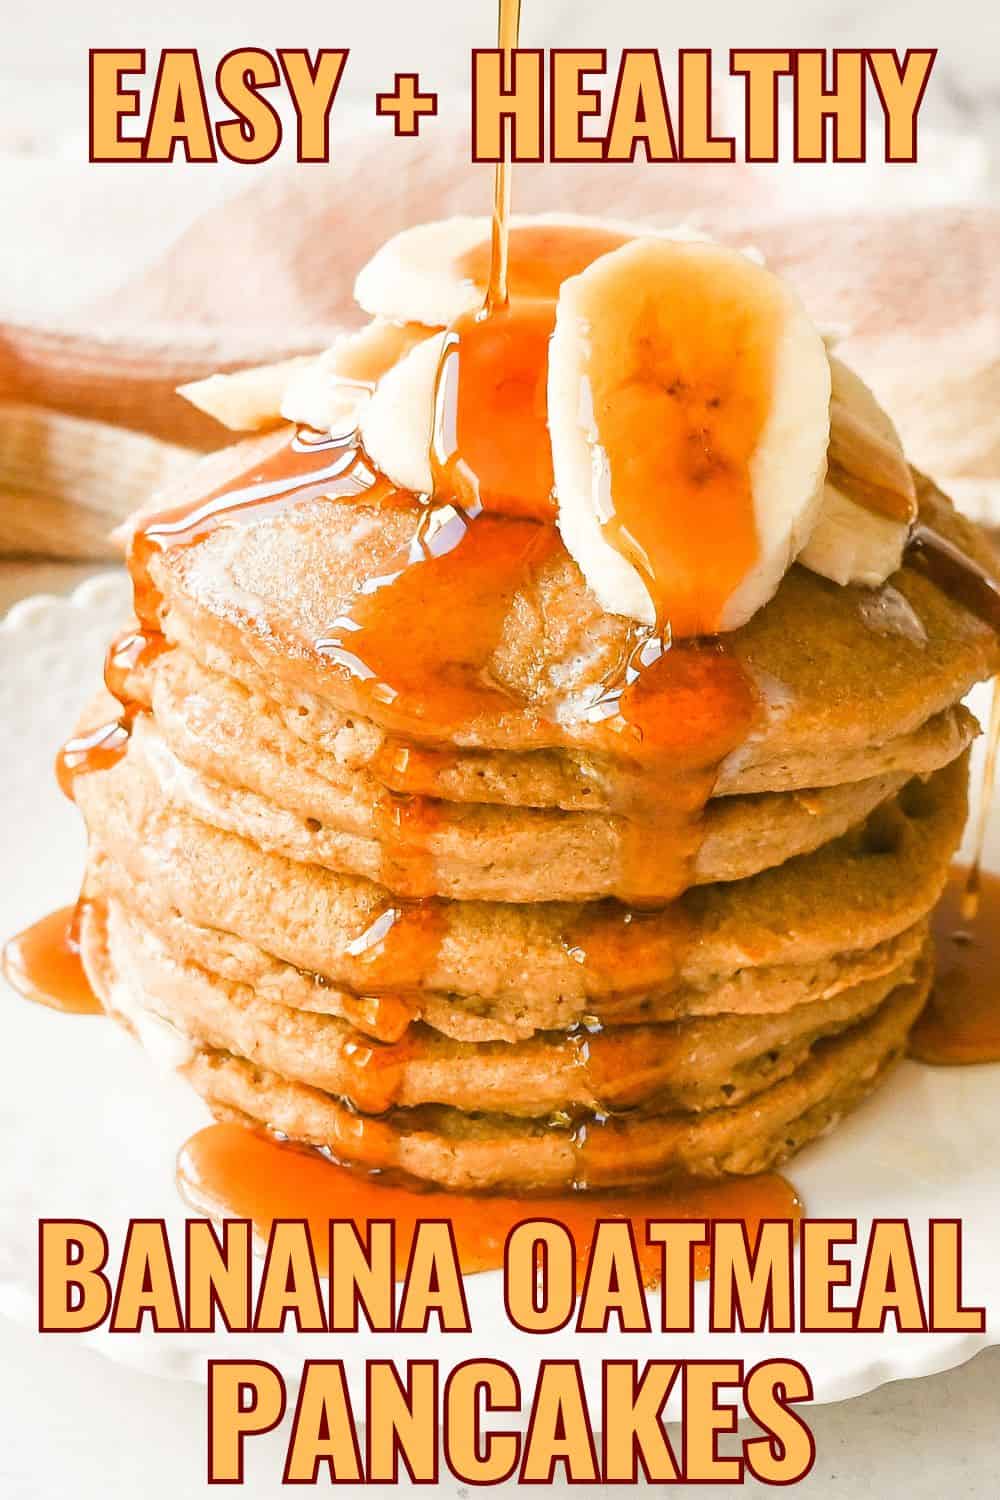 Healthy Banana Oatmeal Pancakes. Banana and Oatmeal Pancakes are delicious healthy pancakes that are gluten-free, dairy-free, and sugar-free. You won't miss any of it! These are the best healthy pancakes have zero butter or oil in them. These light and fluffy gluten-free pancakes will keep you full and satisfied without all of the fillers.  These Banana Oat Pancakes are whipped up in a blender in no time at all. You won't believe how good they taste!